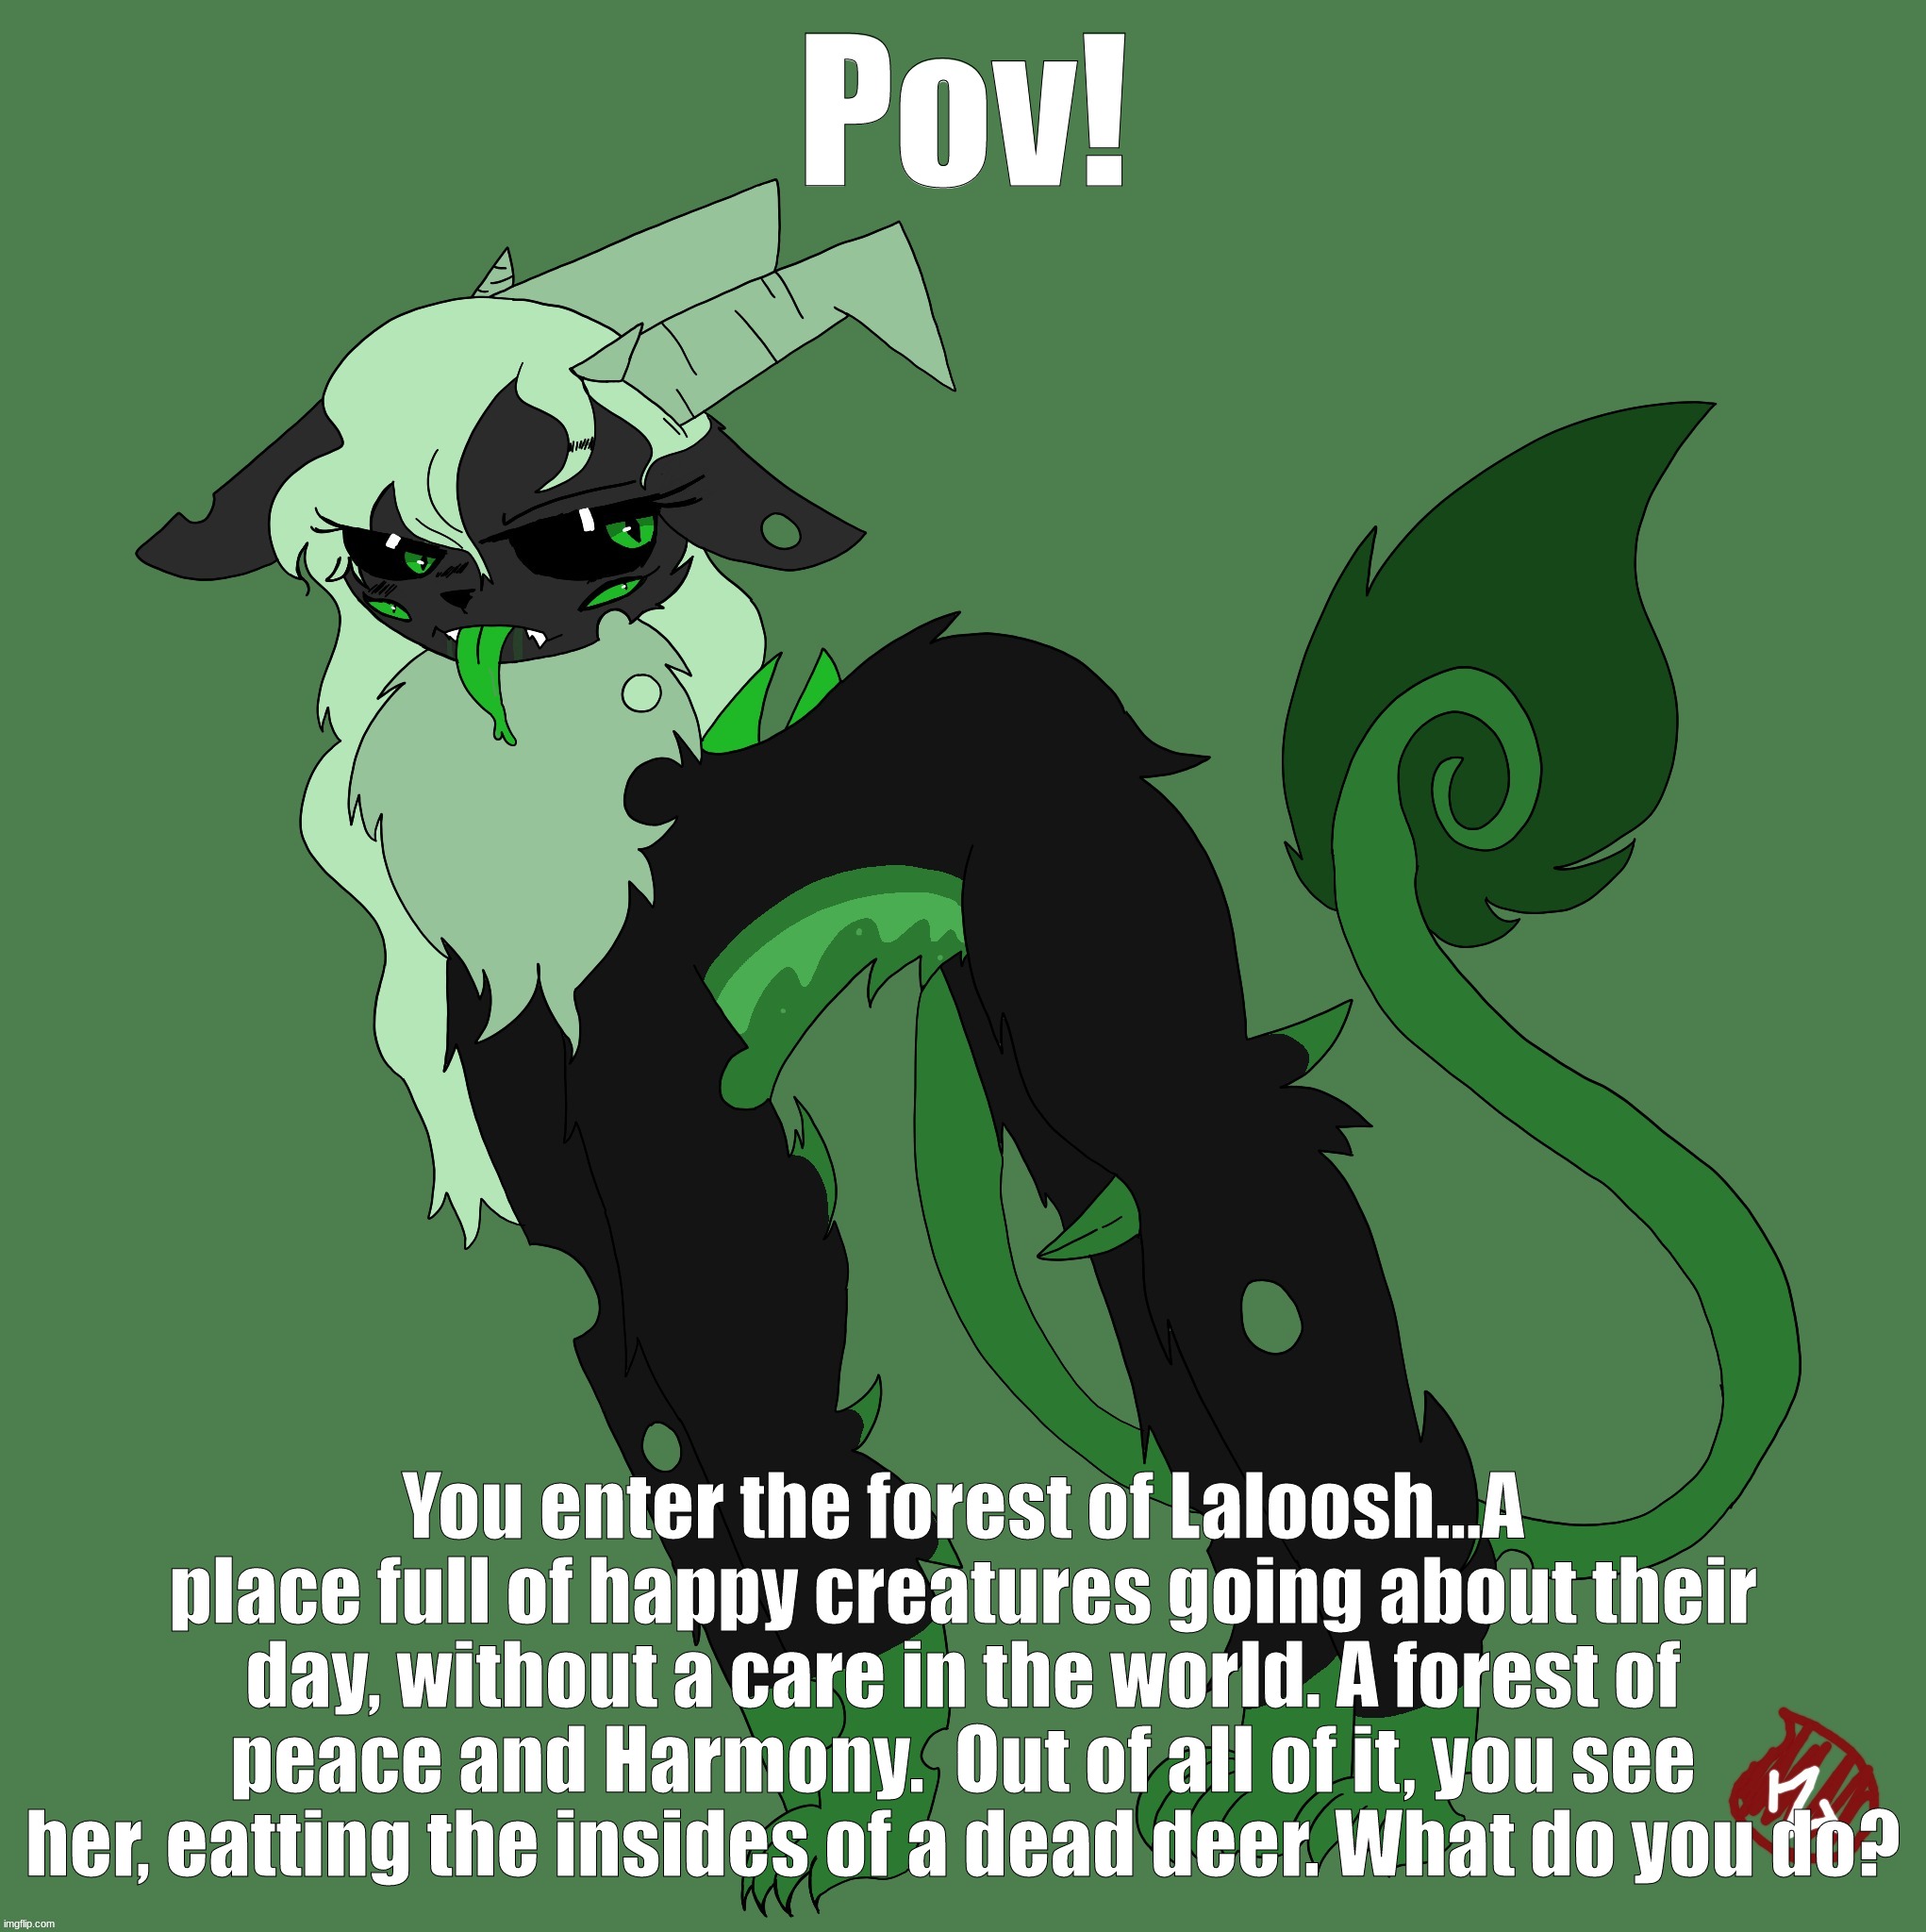 No Joke OC's|Bambi is Allowed|If you want to fight, you cannot instantly kill her|Erp's For Memechat (You really wouldnt-) | Pov! You enter the forest of Laloosh...A place full of happy creatures going about their day, without a care in the world. A forest of peace and Harmony.  Out of all of it, you see her, eatting the insides of a dead deer. What do you do? | made w/ Imgflip meme maker